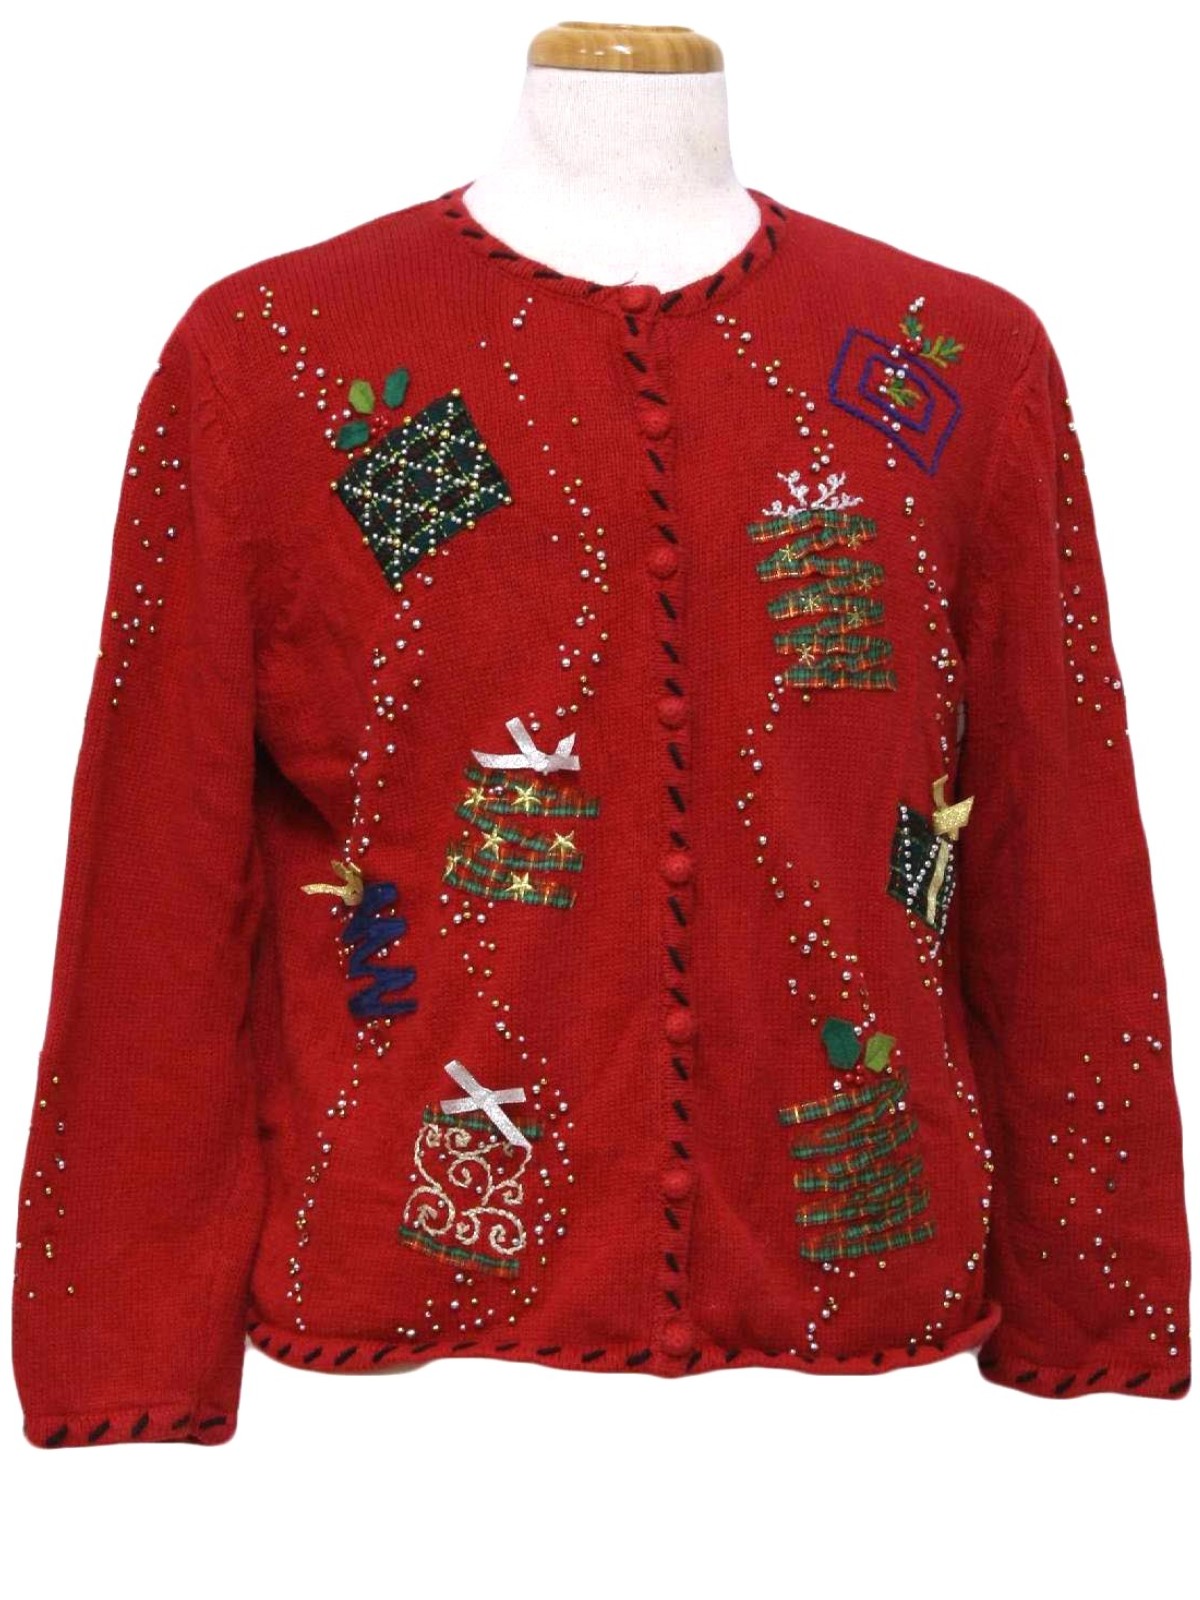 Womens Ugly Christmas Sweater: -Studio- Womens red background ramie ...